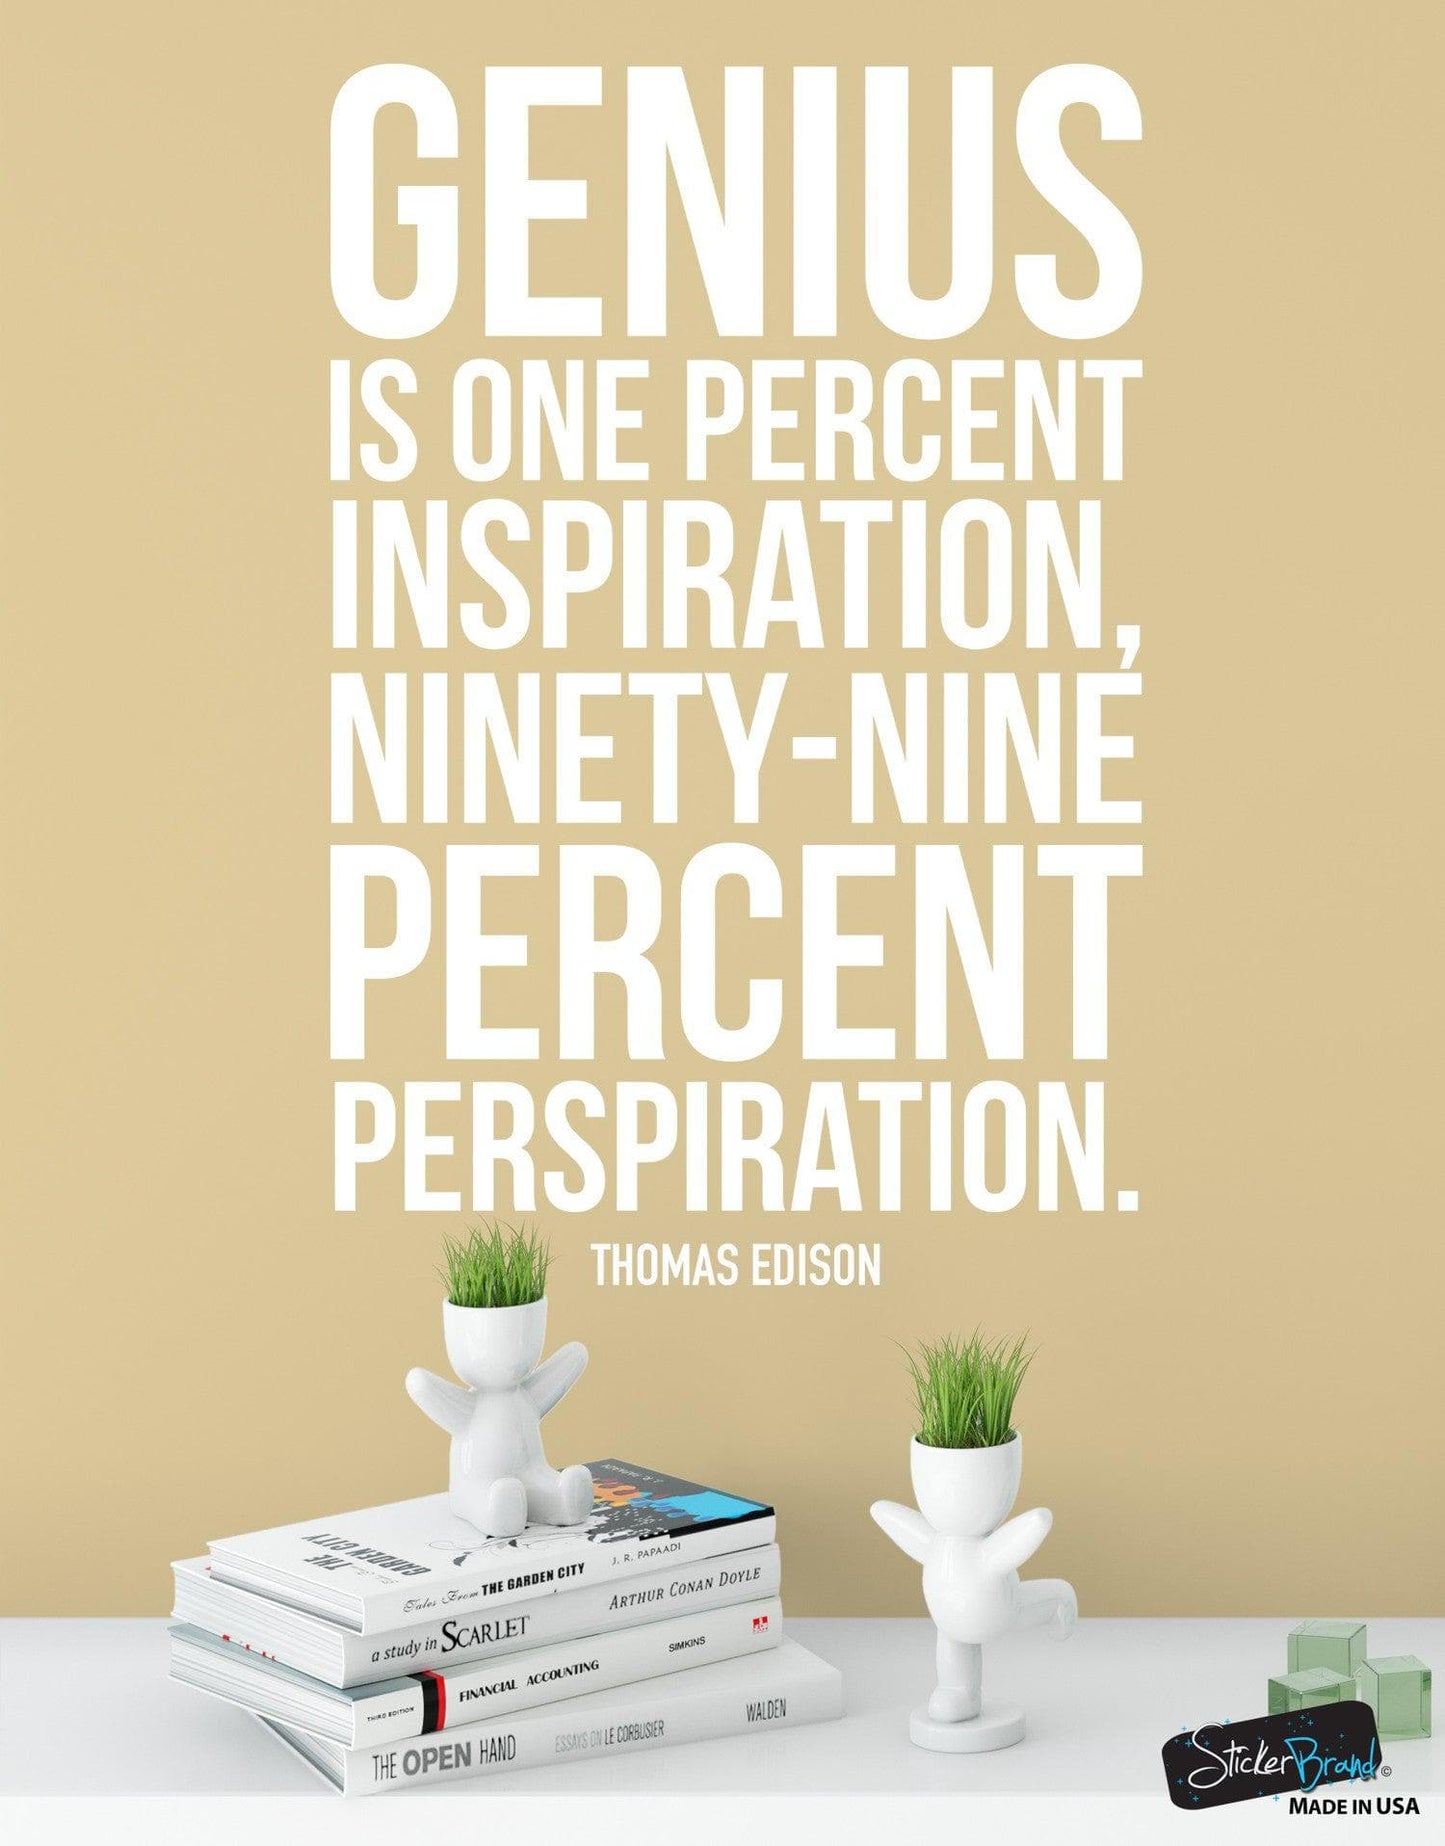 Thomas Edison Quote: Genius is One Percent Inspiration, Ninety-Nine Percent Perspiration Motivational Quote Wall Decal Sticker #6090